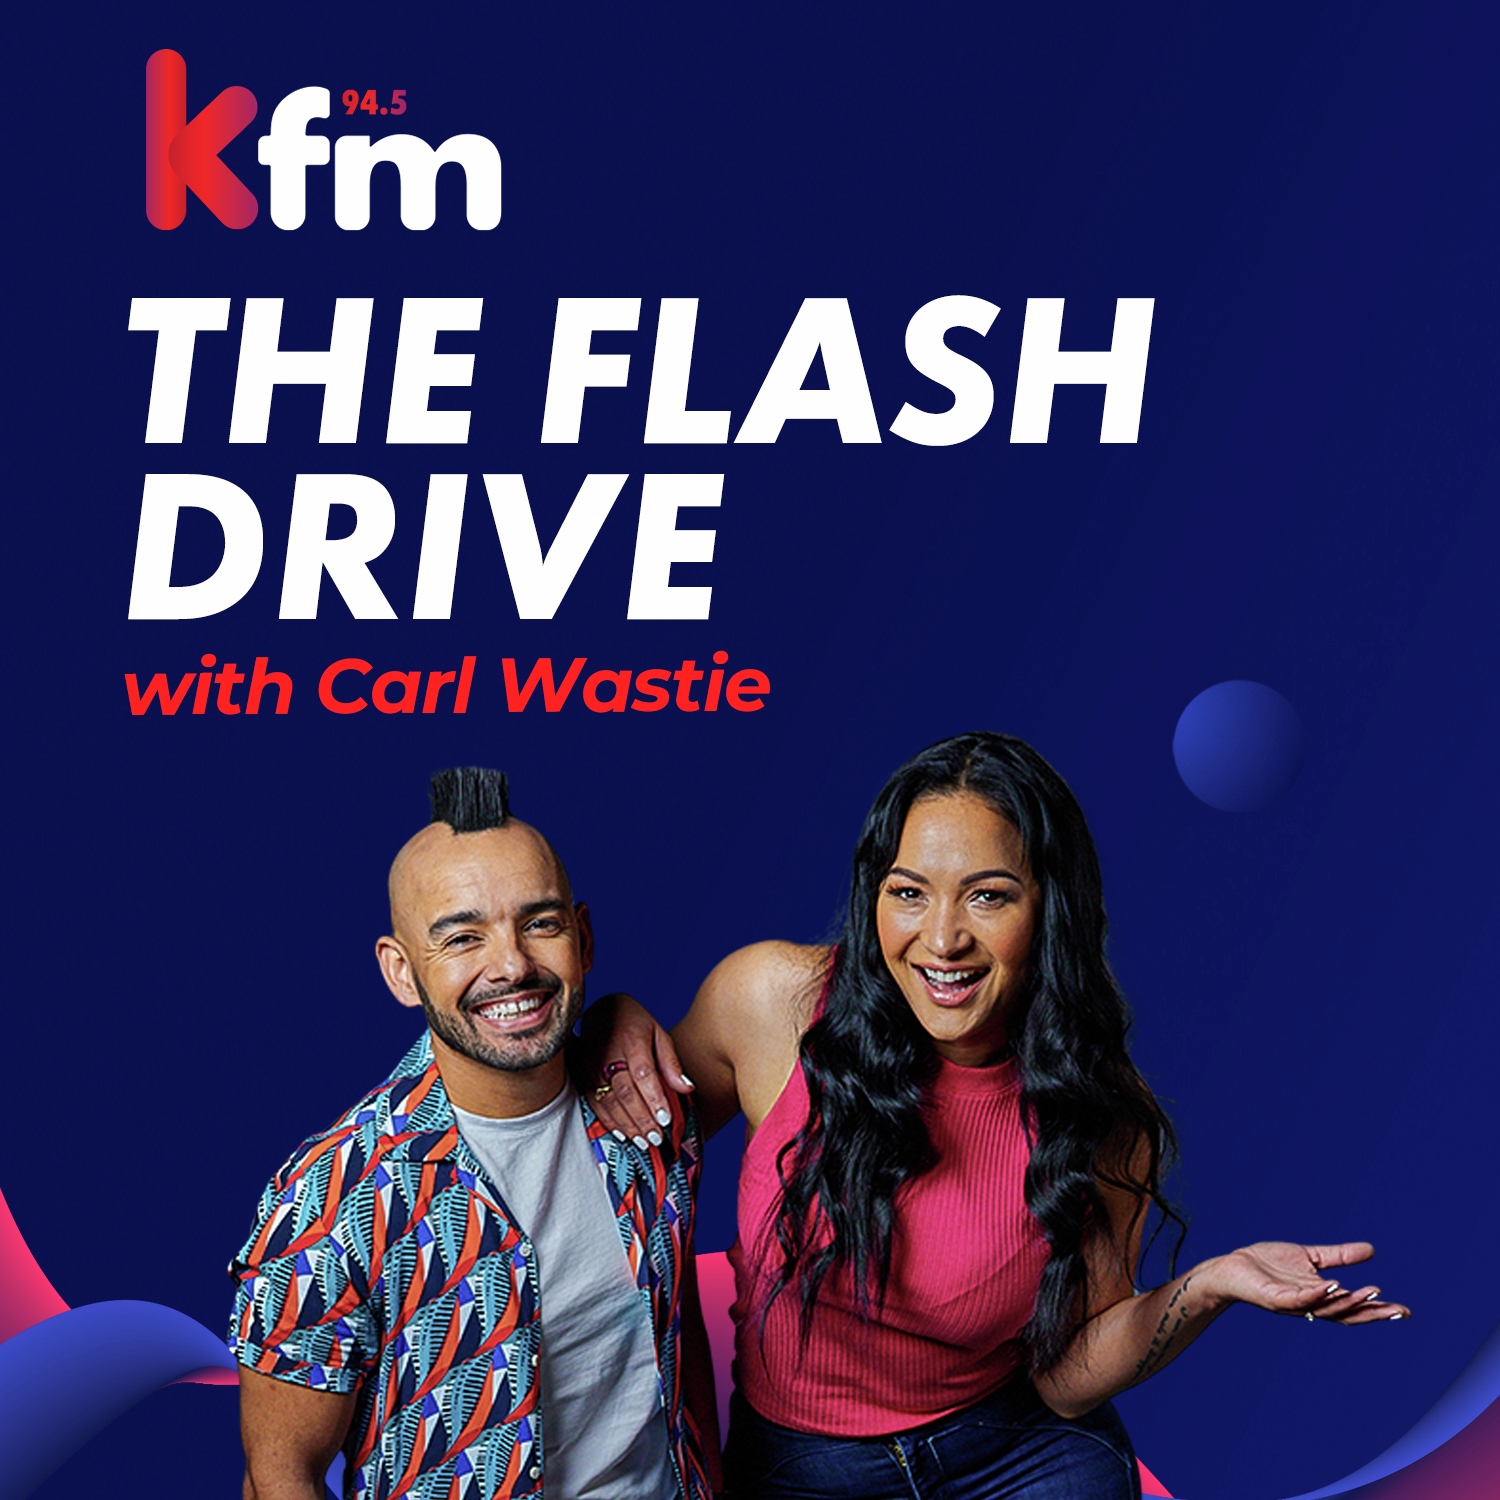 The Flash Drive with Carl Wastie